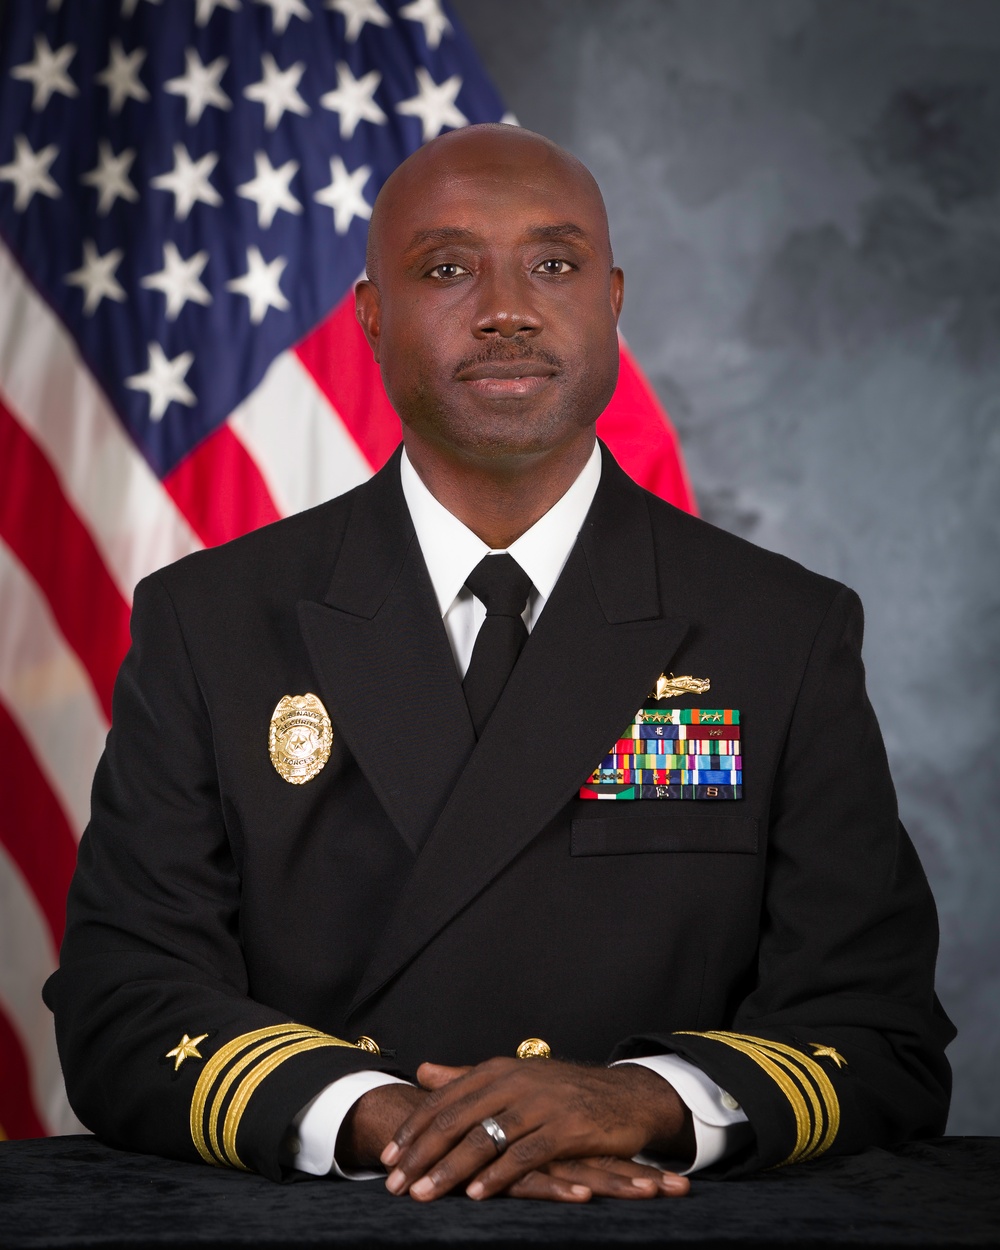 DVIDS - Images - Official portrait, Operations Officer, Joint Base